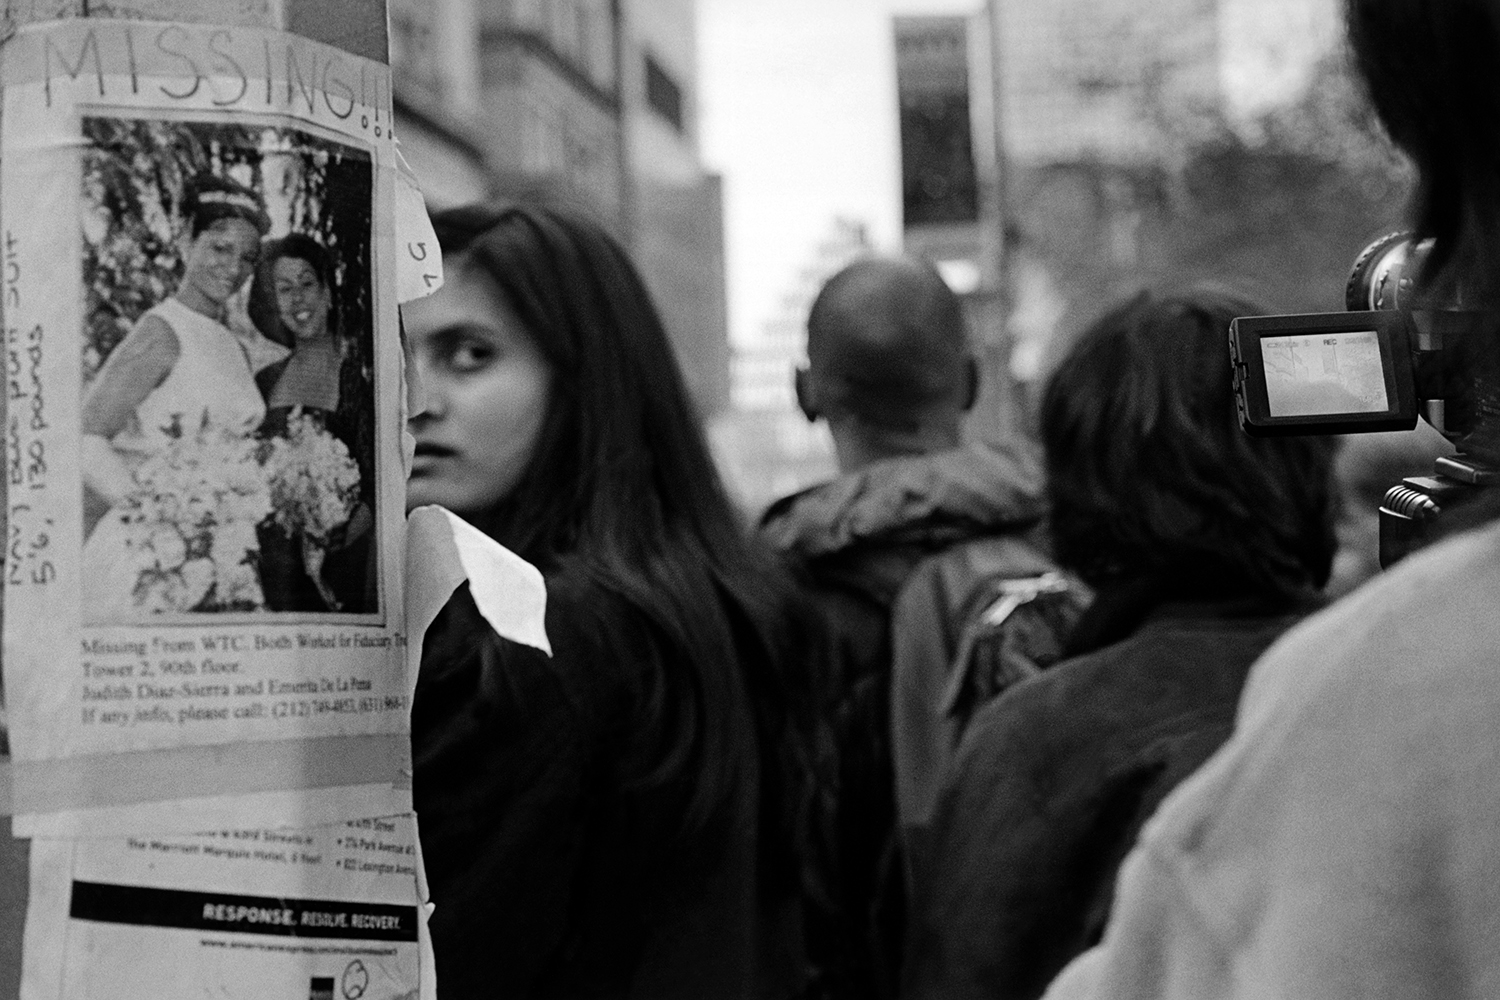   Onlookers on Broadway  New York, NY. &nbsp;2001 